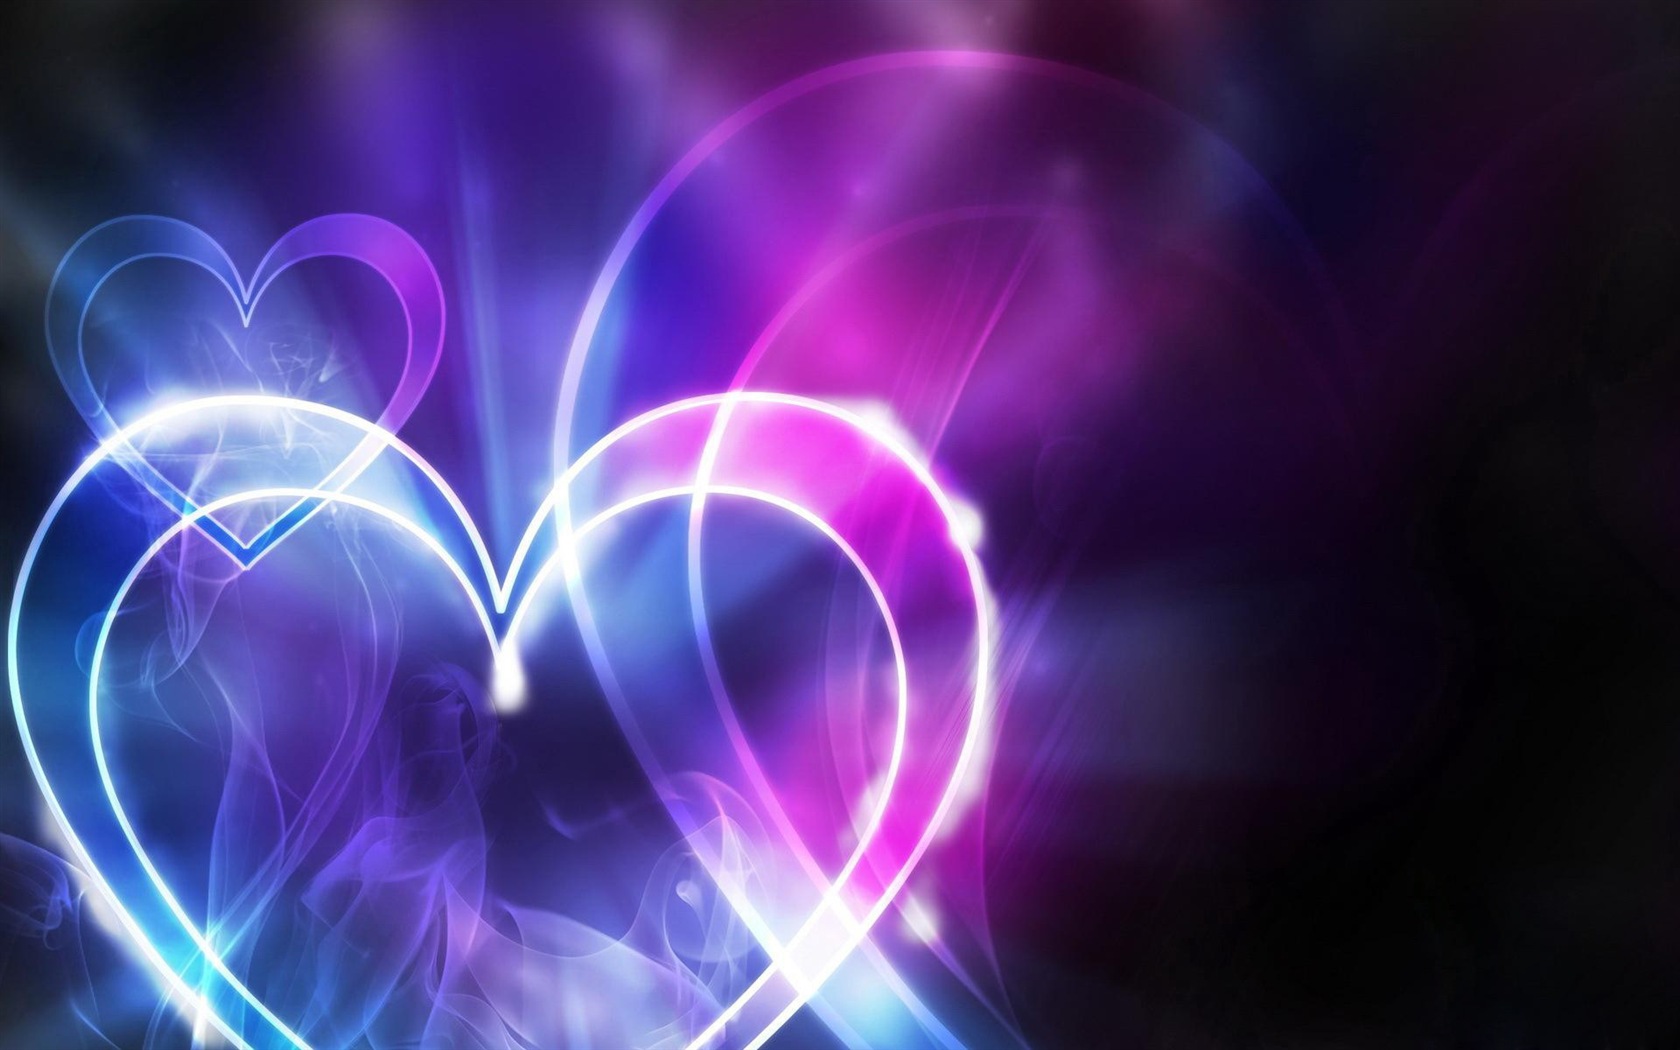 The theme of love, creative heart-shaped HD wallpapers #8 - 1680x1050